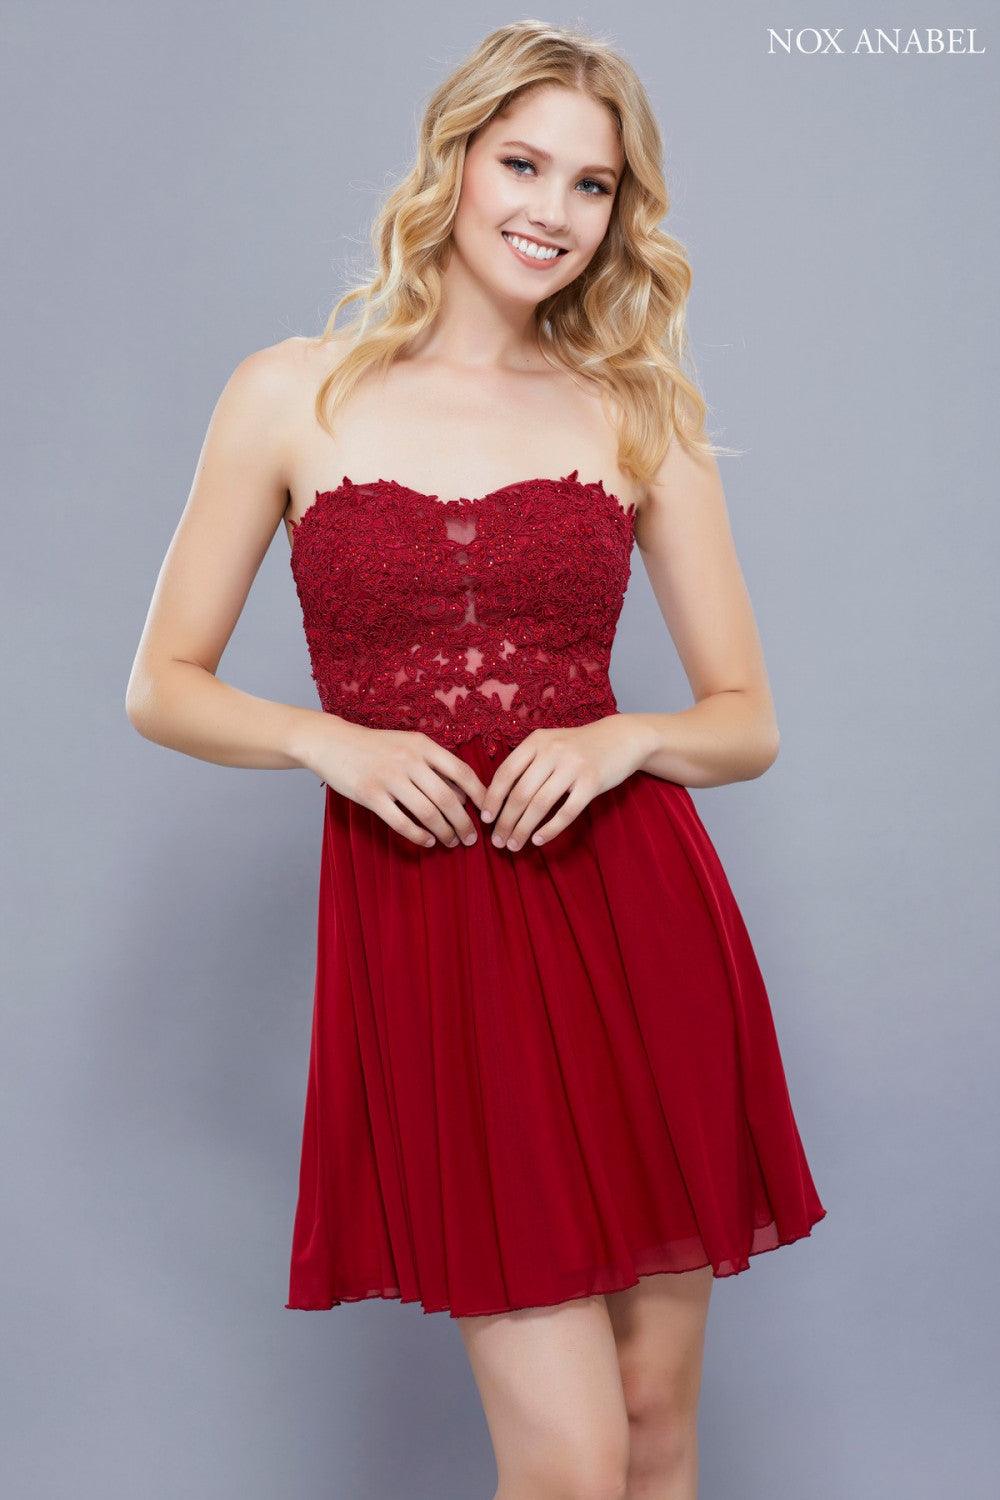 Short Strapless Formal Prom Cocktail Dress - The Dress Outlet Nox Anabel